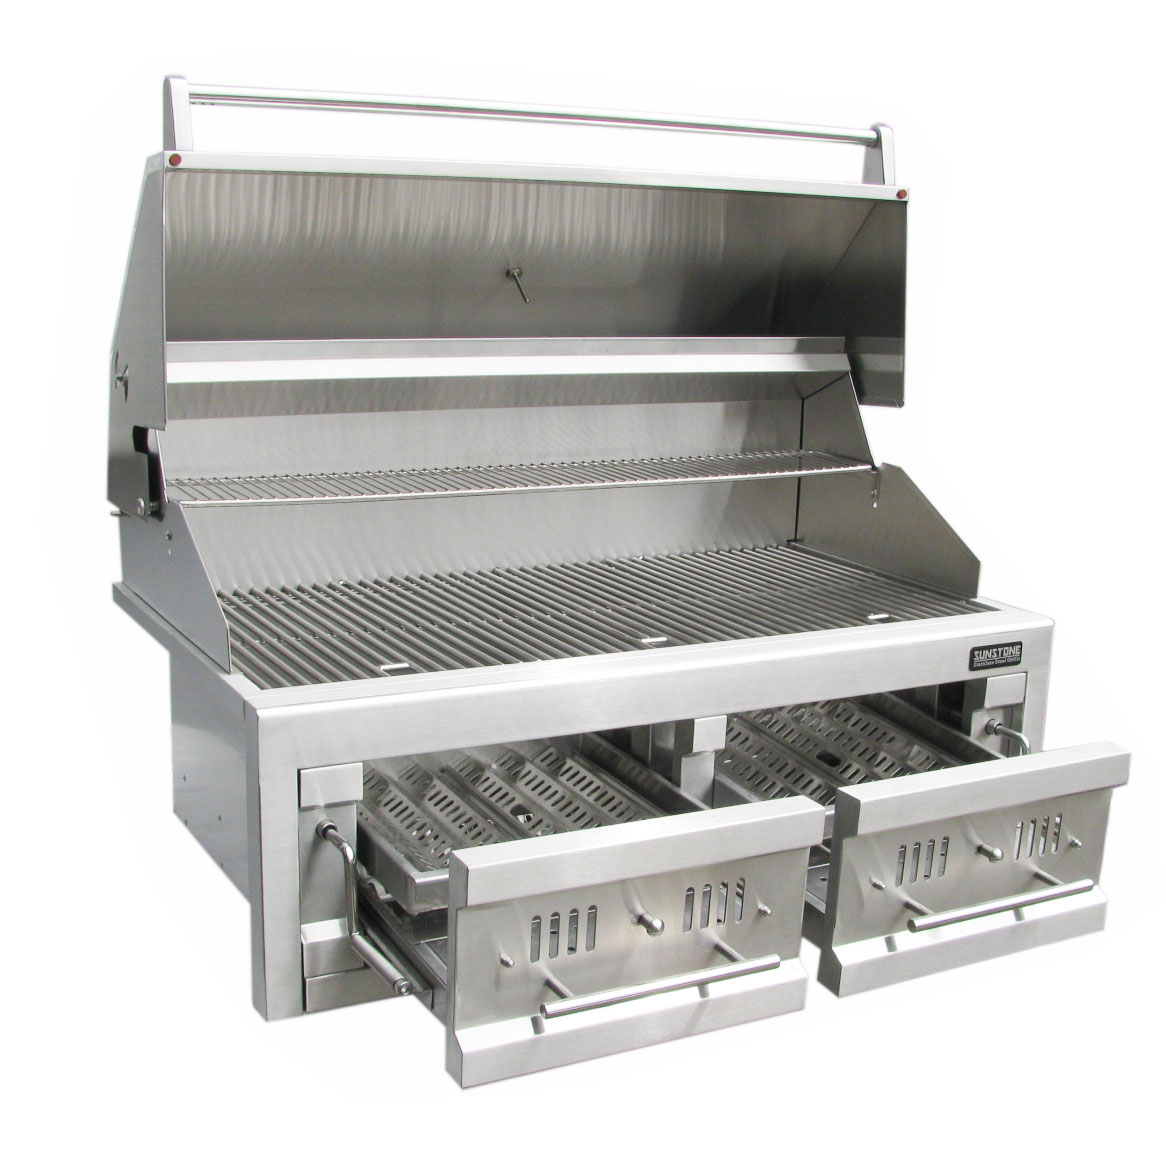 Dual Zone Stainless Steel Charcoal Grill by Sunstone